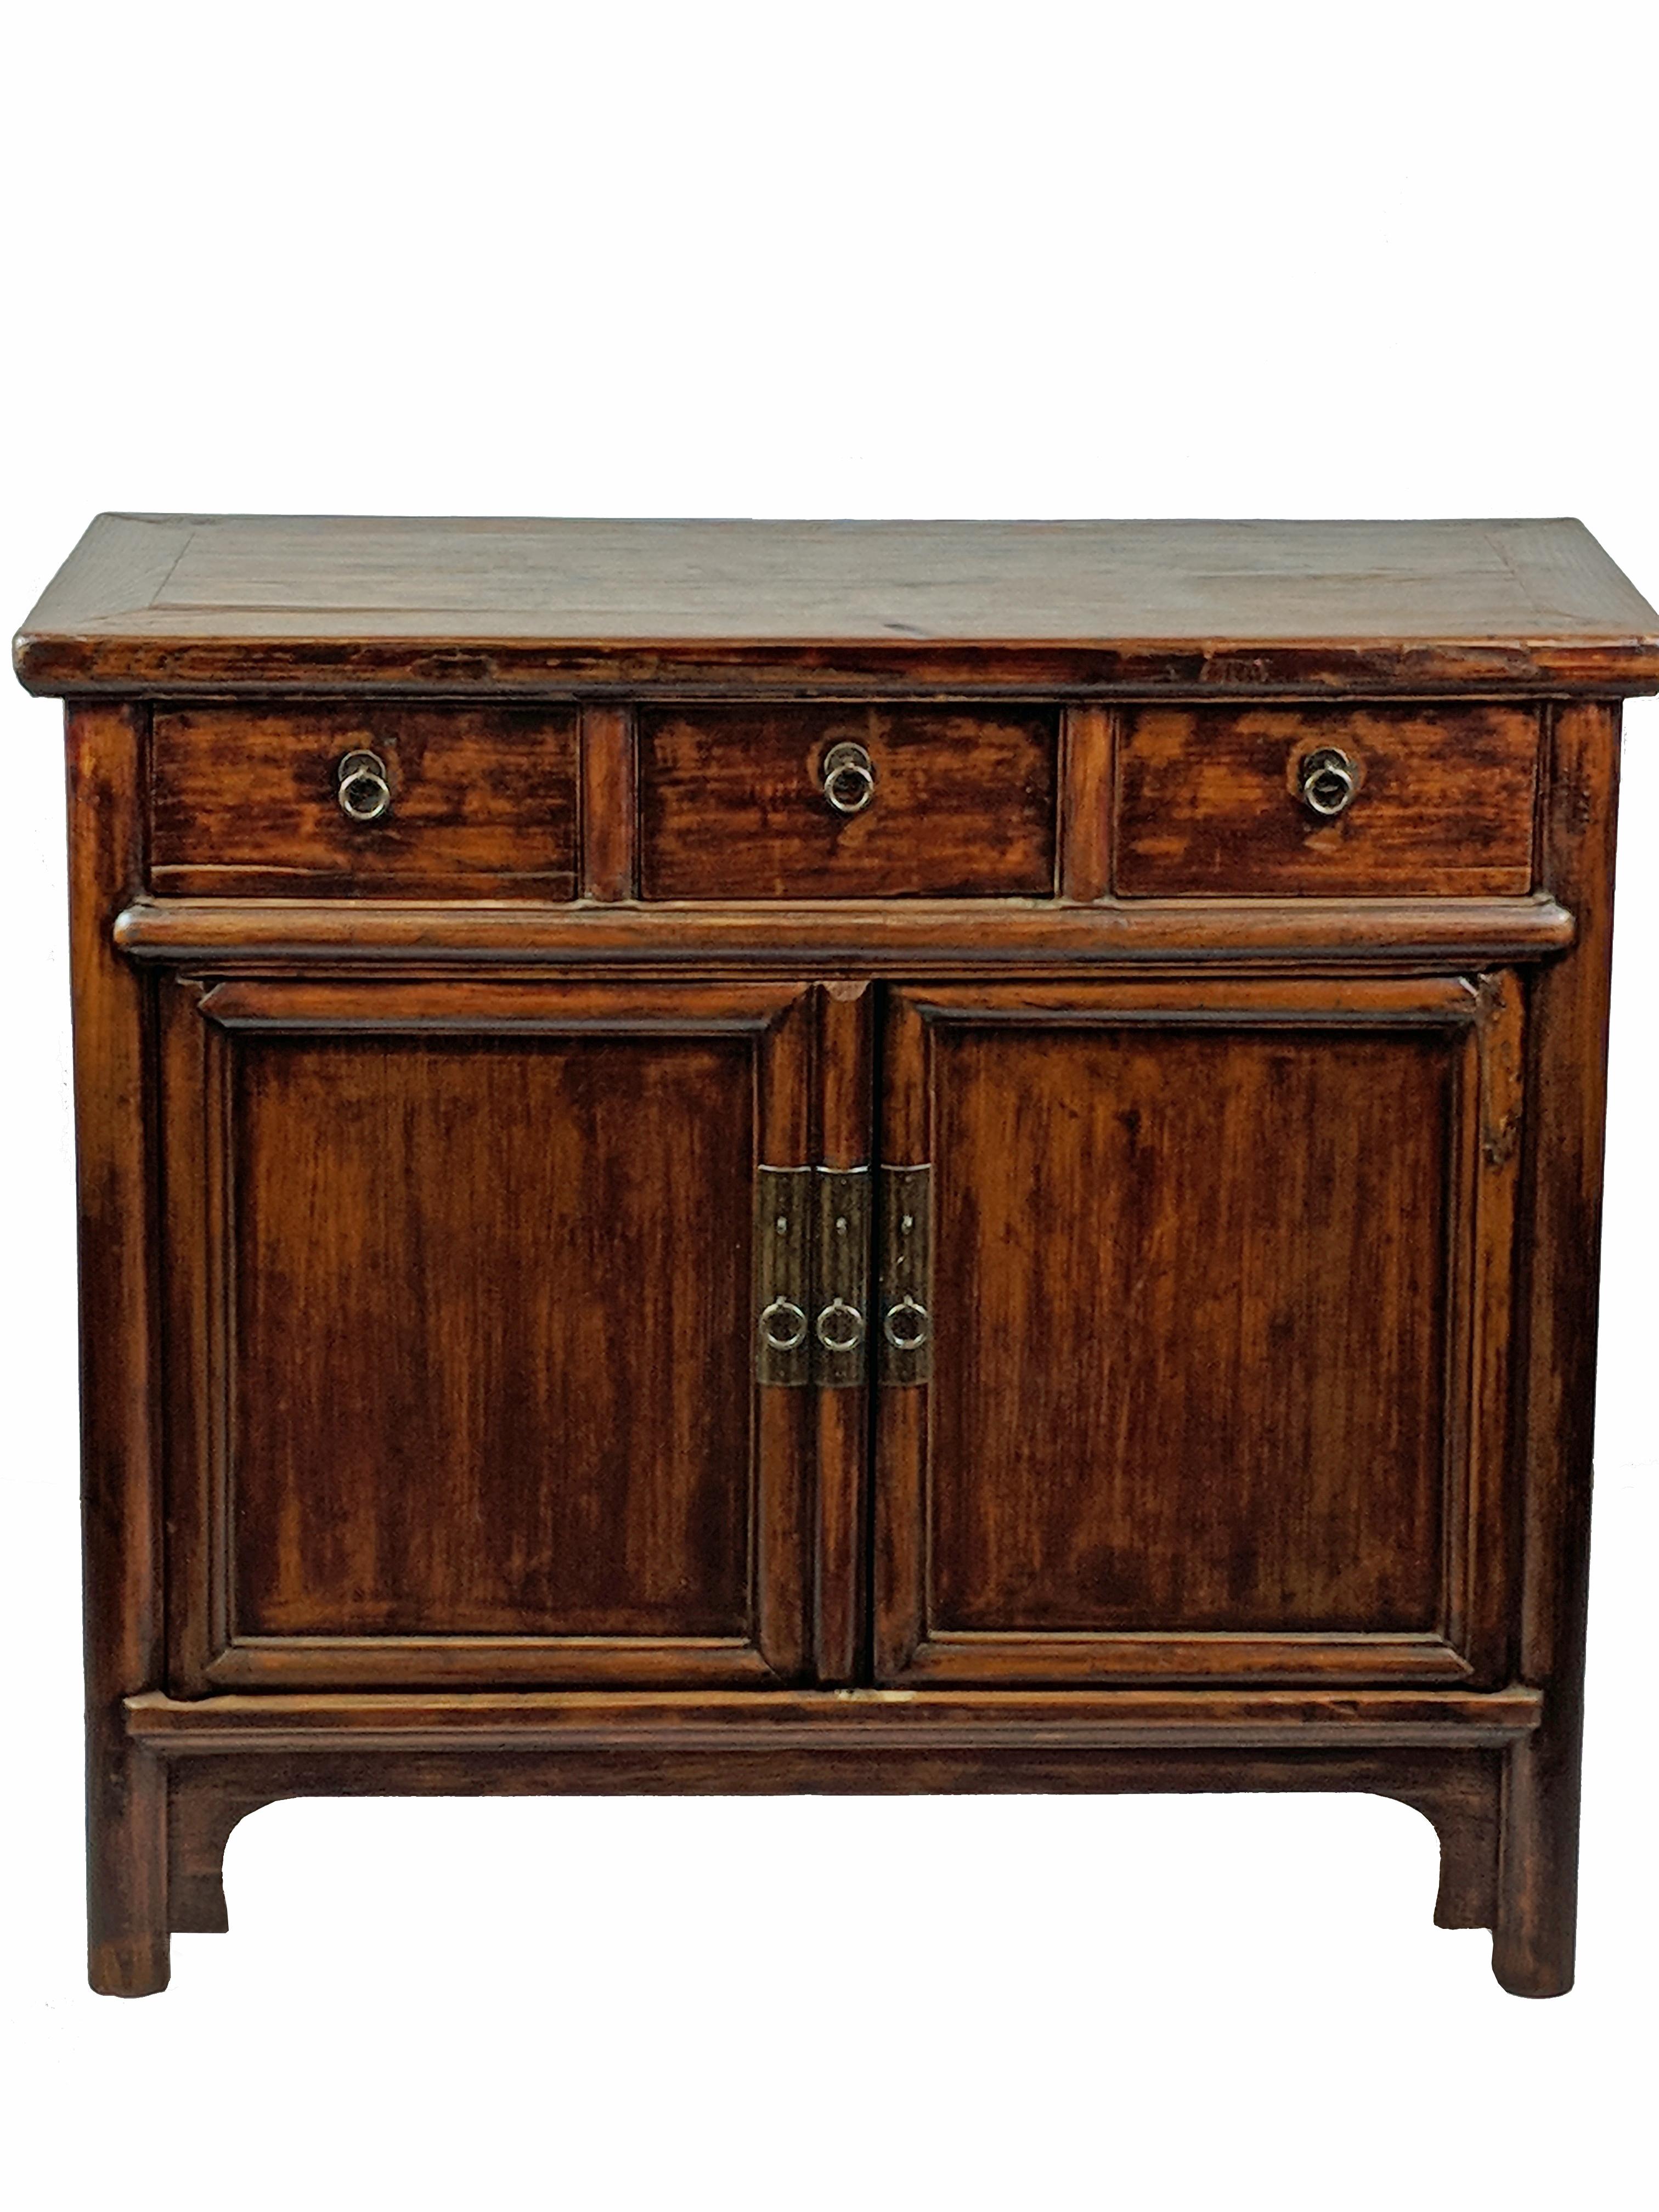 A simple countryside cabinet with its original paint and natural textured wood. It has round smooth posts around doors, drawers, and frame. Three drawers and two doors open to a main compartment. This quietly elegant antique cabinet will make a